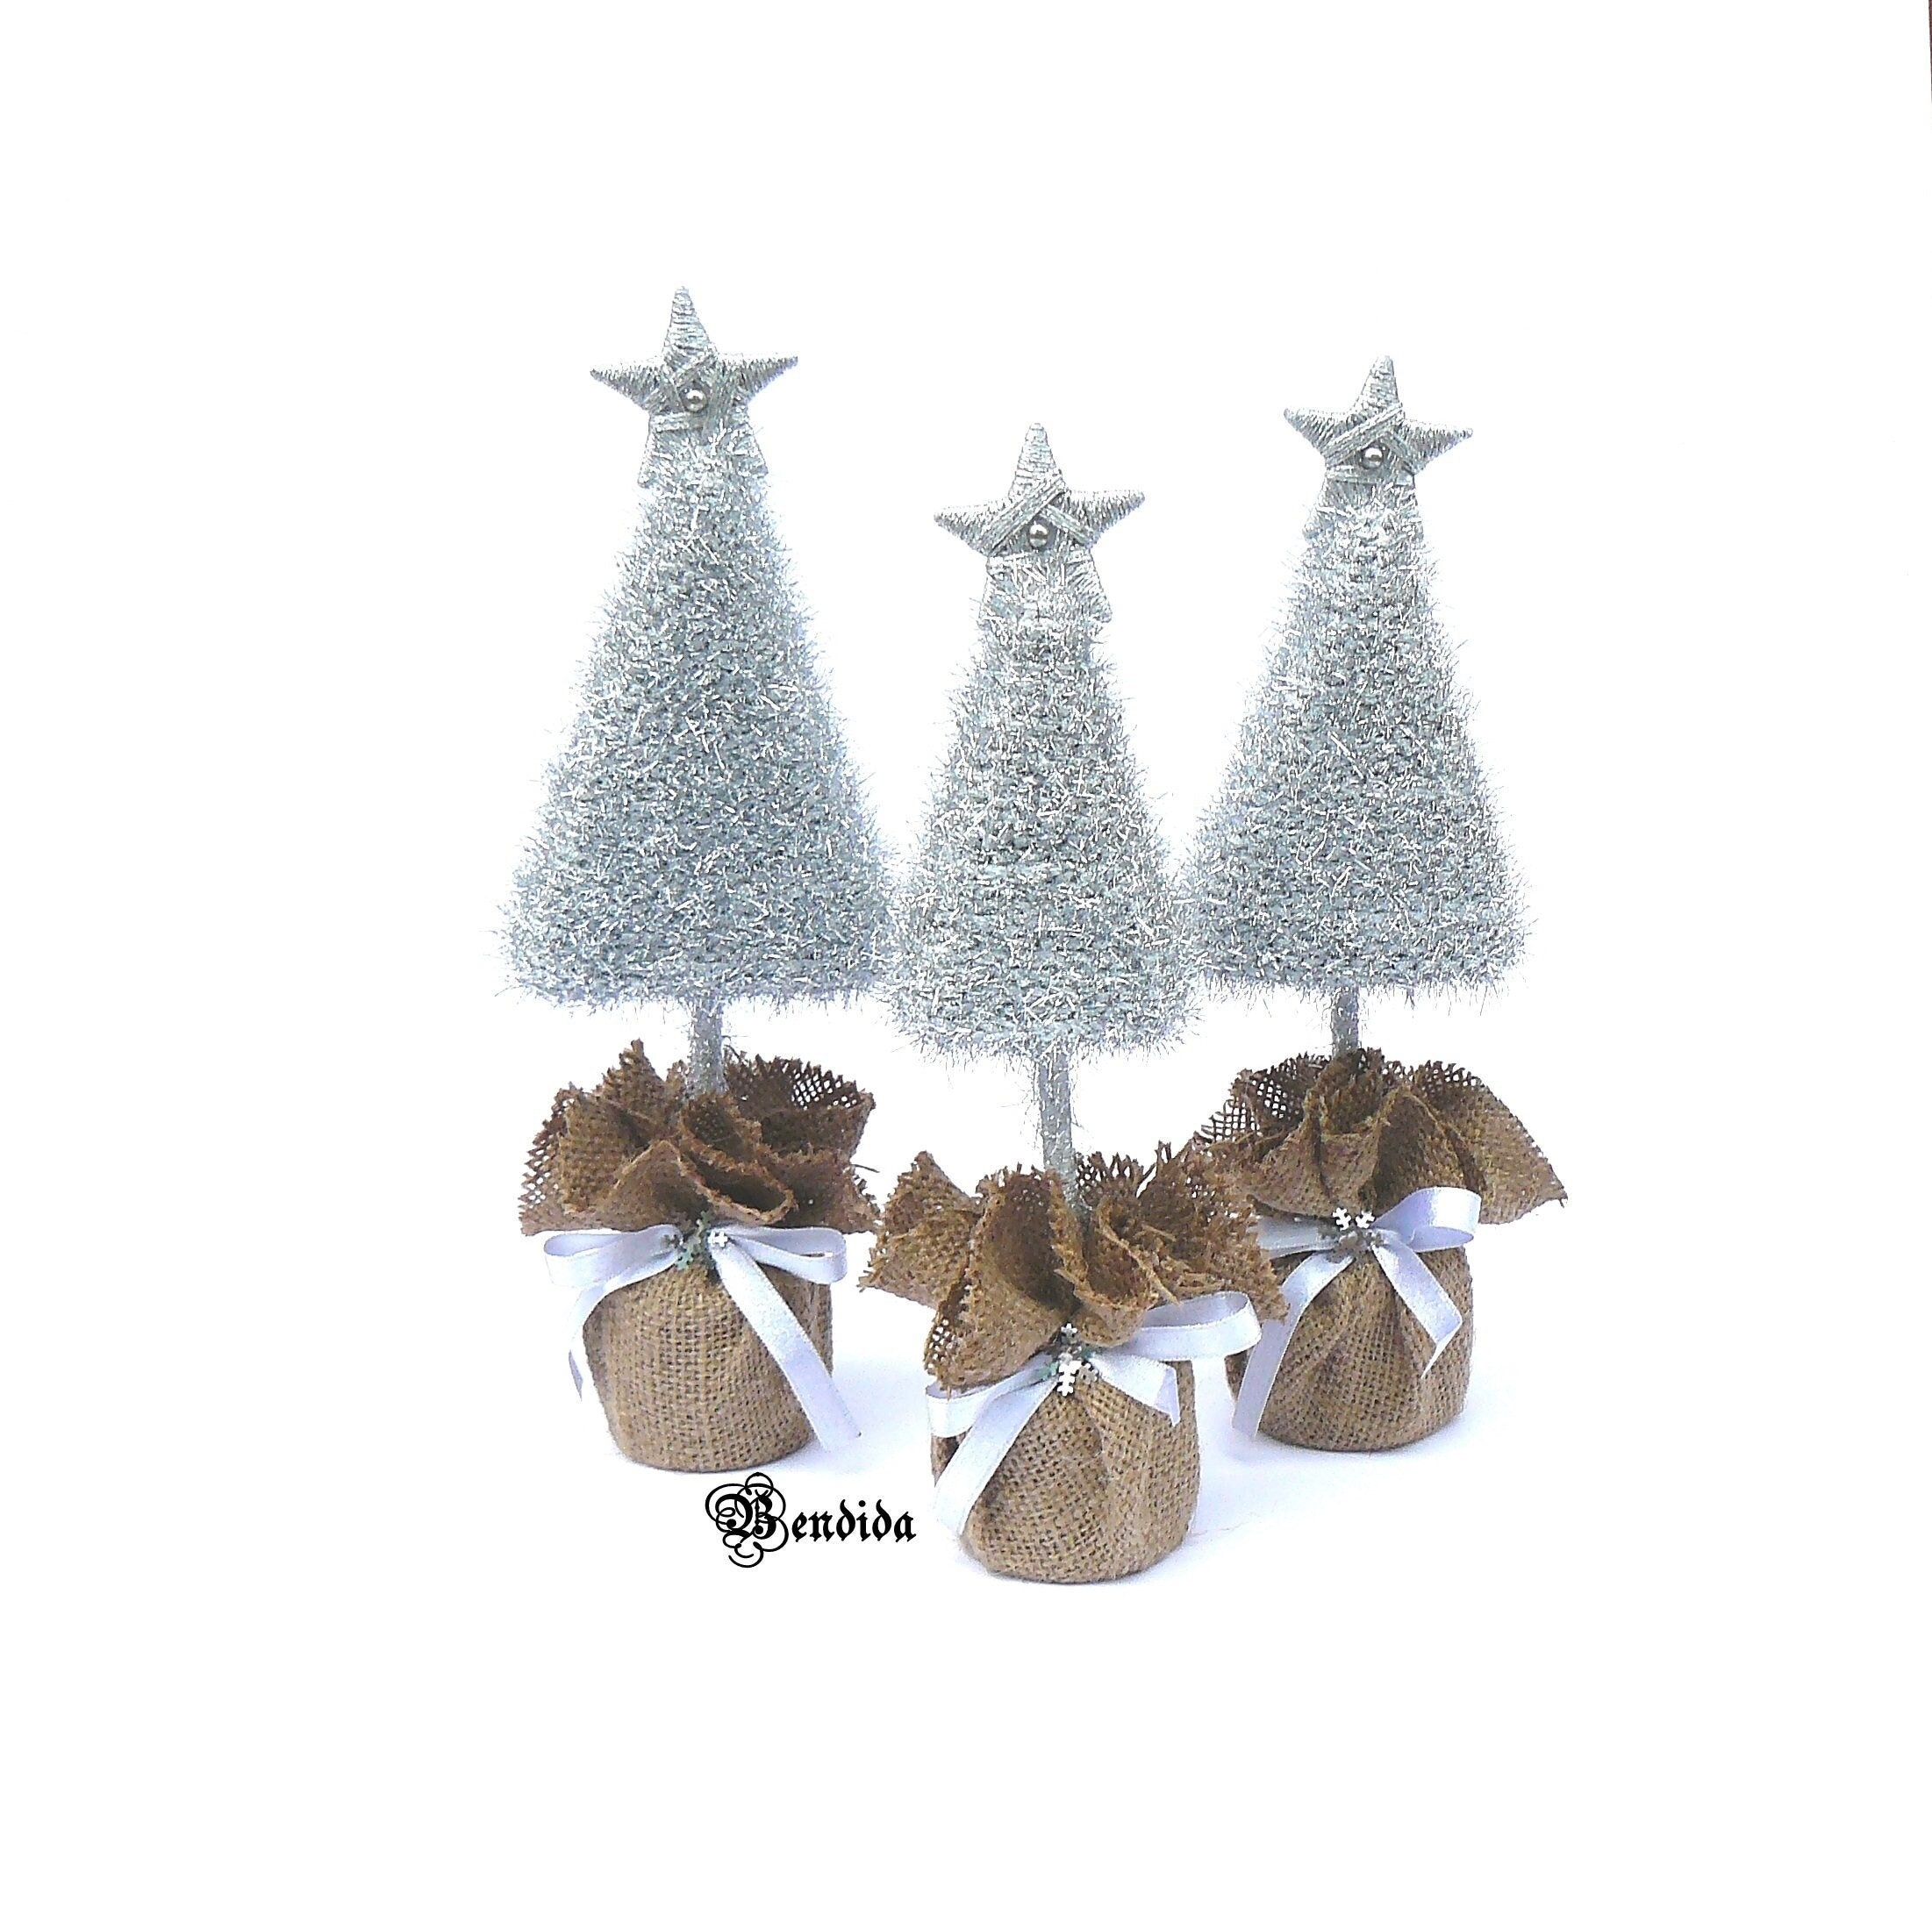 Gilded Silver Metallic Feather Trees - Christmas, Fall Decorative